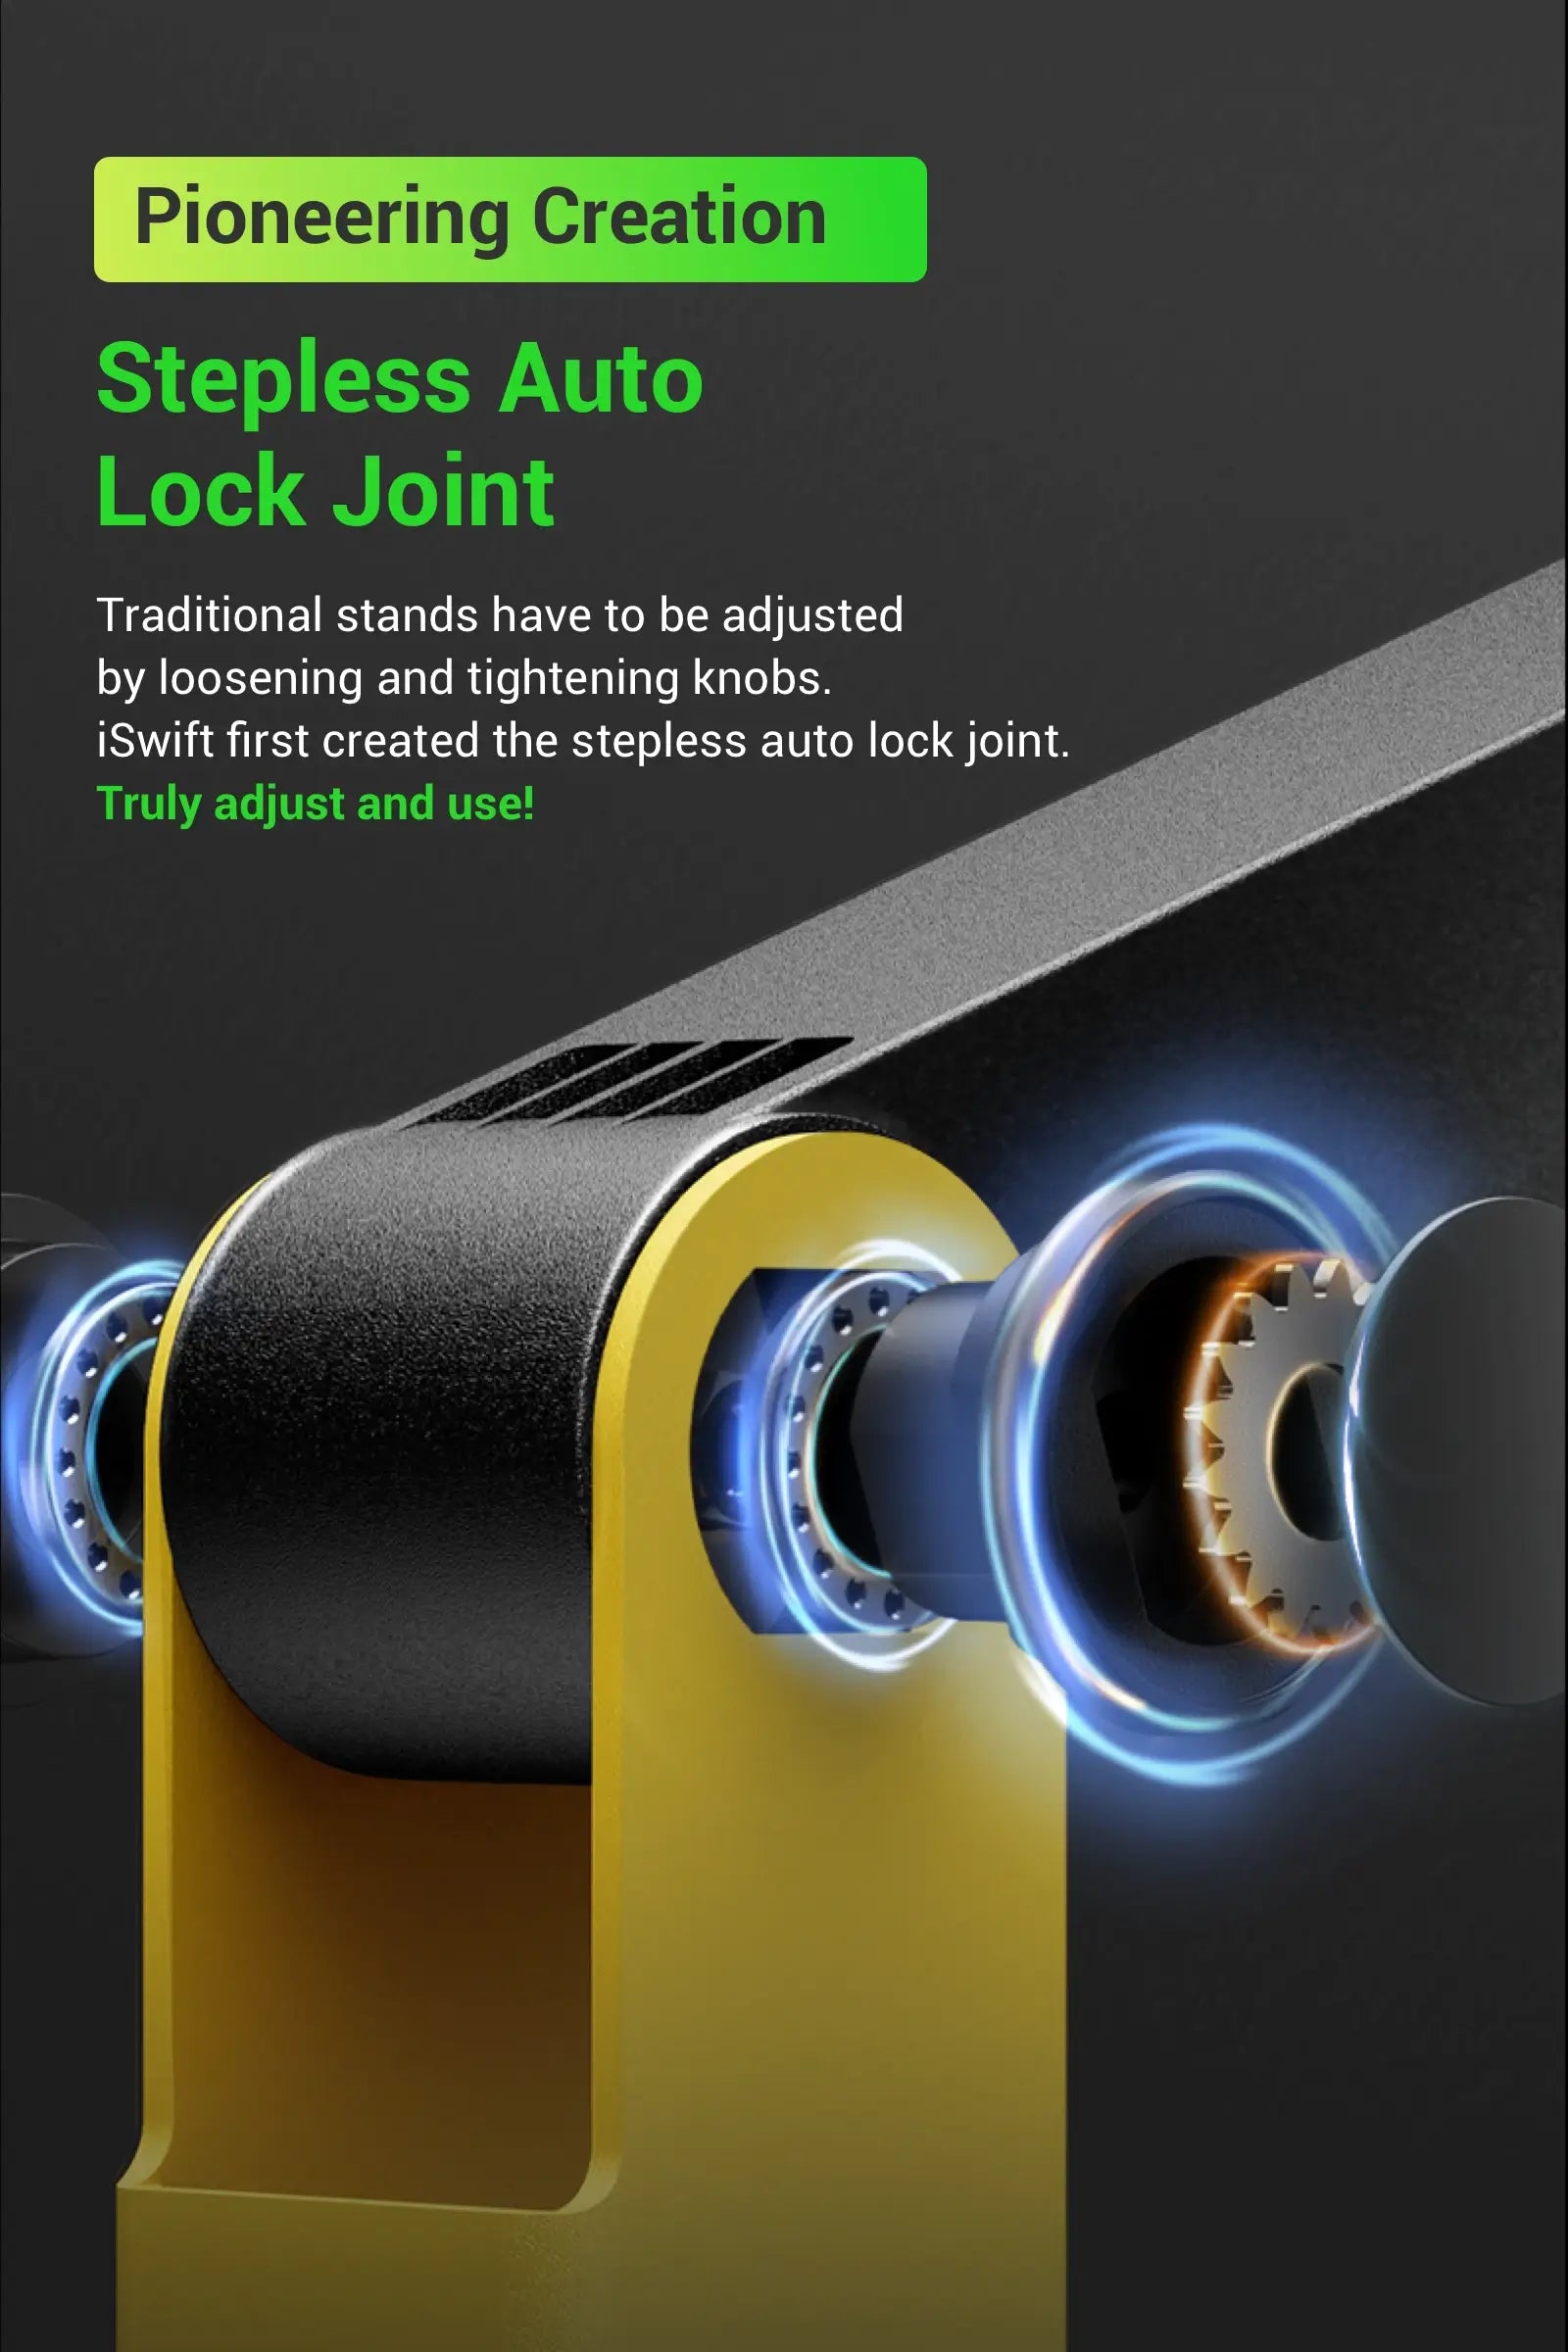 Stepless Auto Lock Joint Pioneering Creation Traditional stands have to be adjusted by loosening and tightening knobs. iSwift first created the stepless auto lock joint. Truly adjust and use!